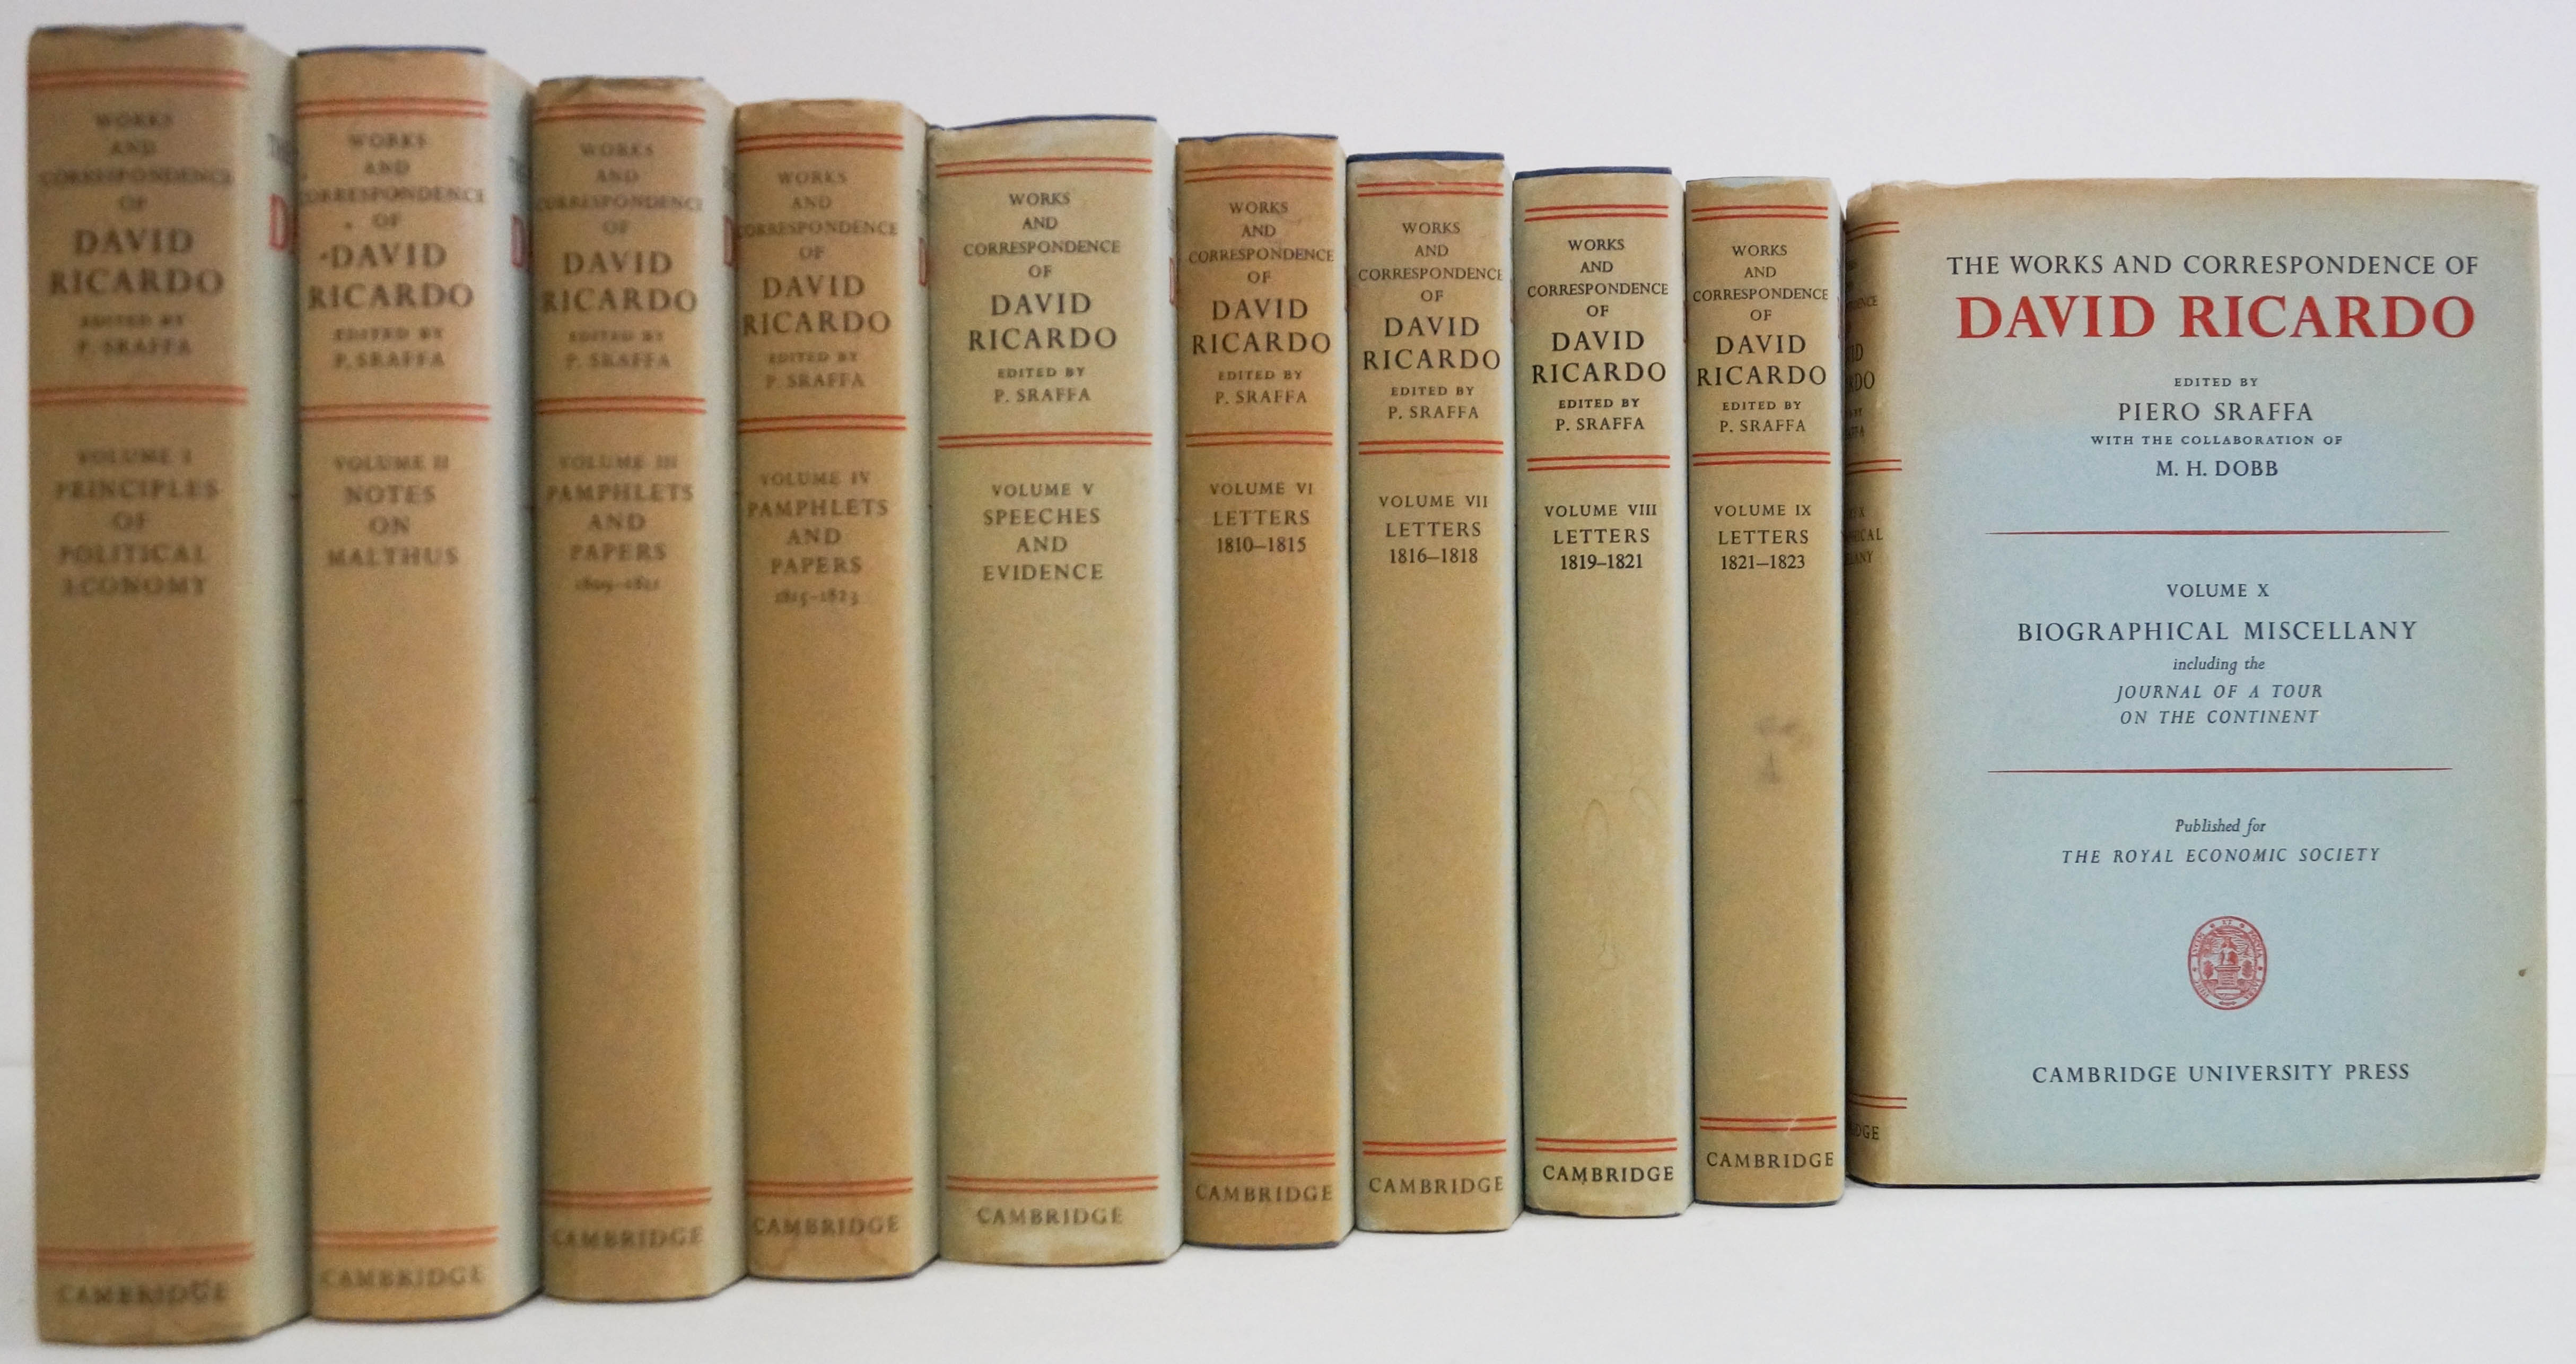 RICARDO, DAVID - The works and correspondance of David Ricardo. Edited by Piero Sraffa with the collaboration of M.H. Dobb. 10 volumes. (volume 11, the general index is missing)